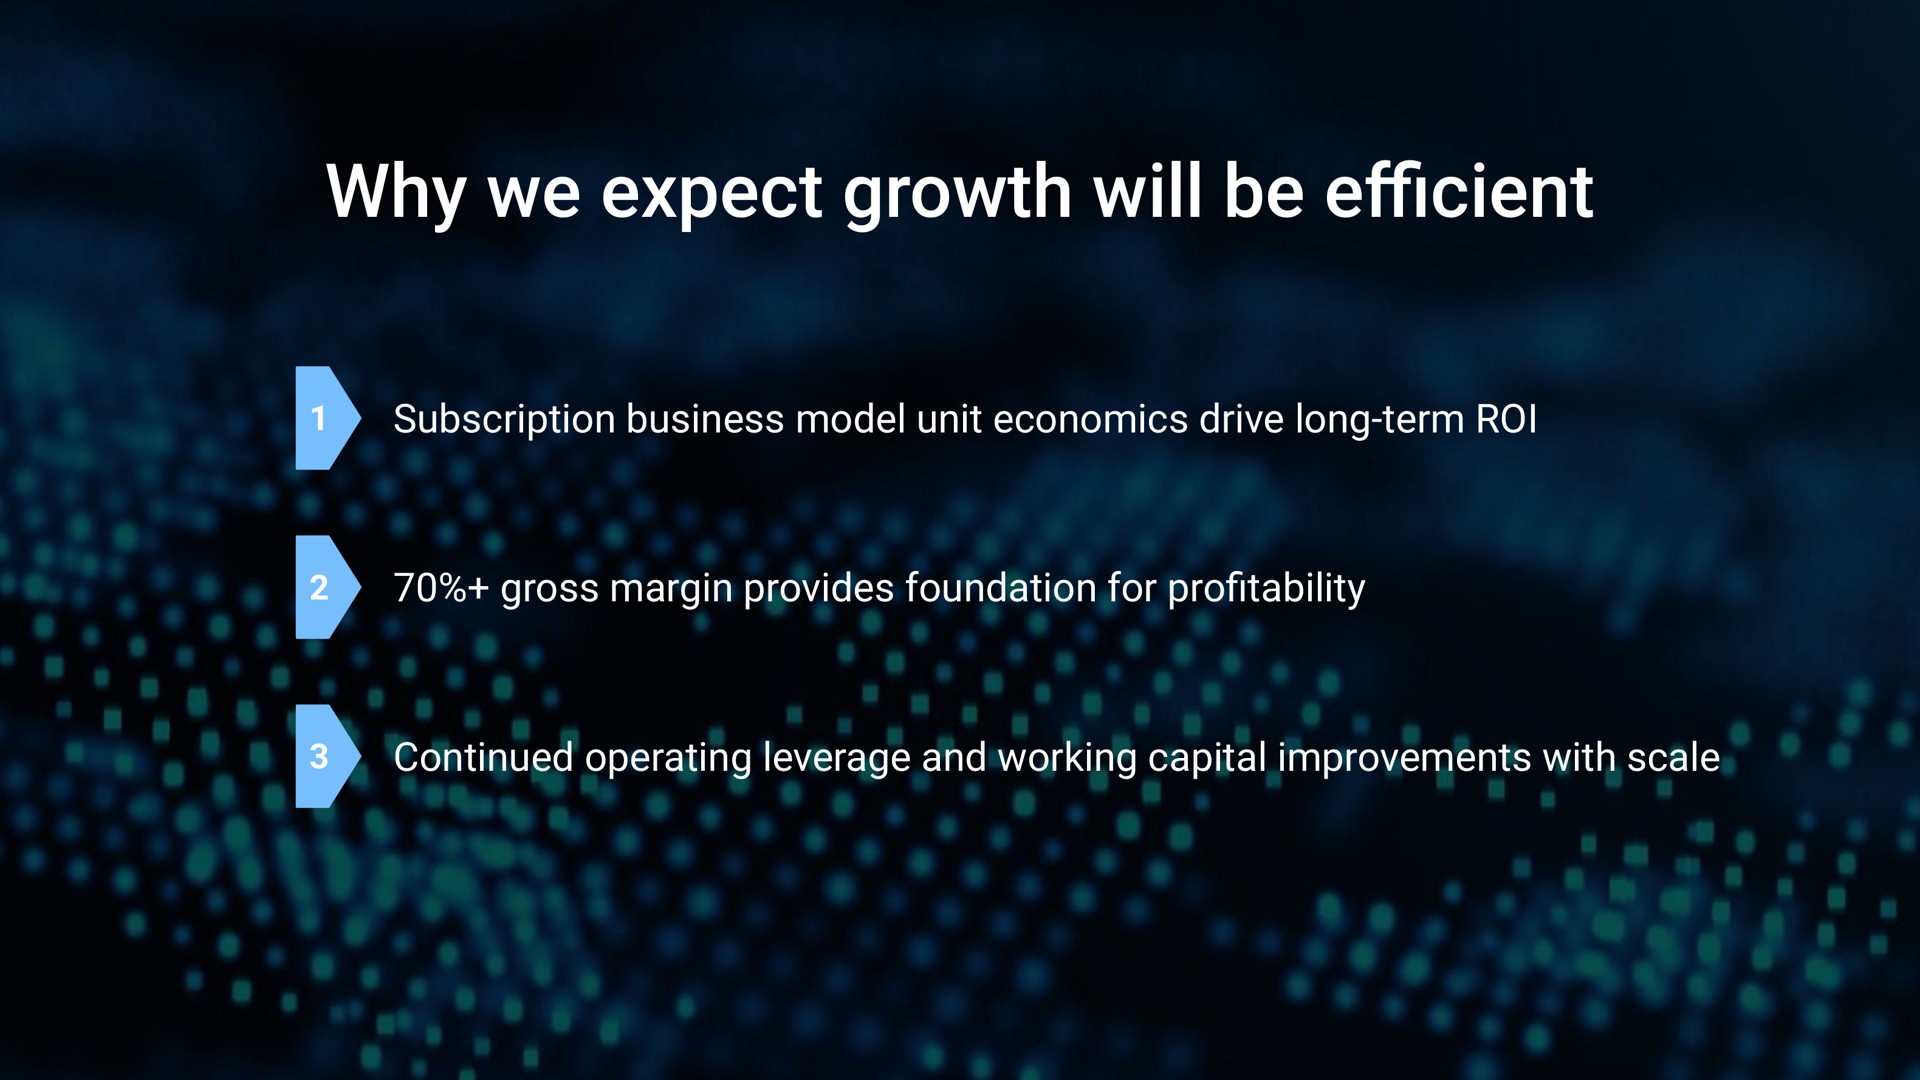 why we expect growth will be subscription business model unit economics drive long term roi gross margin provides foundation for pro continued operating leverage and working capital improvements with scale efficient | Samsara